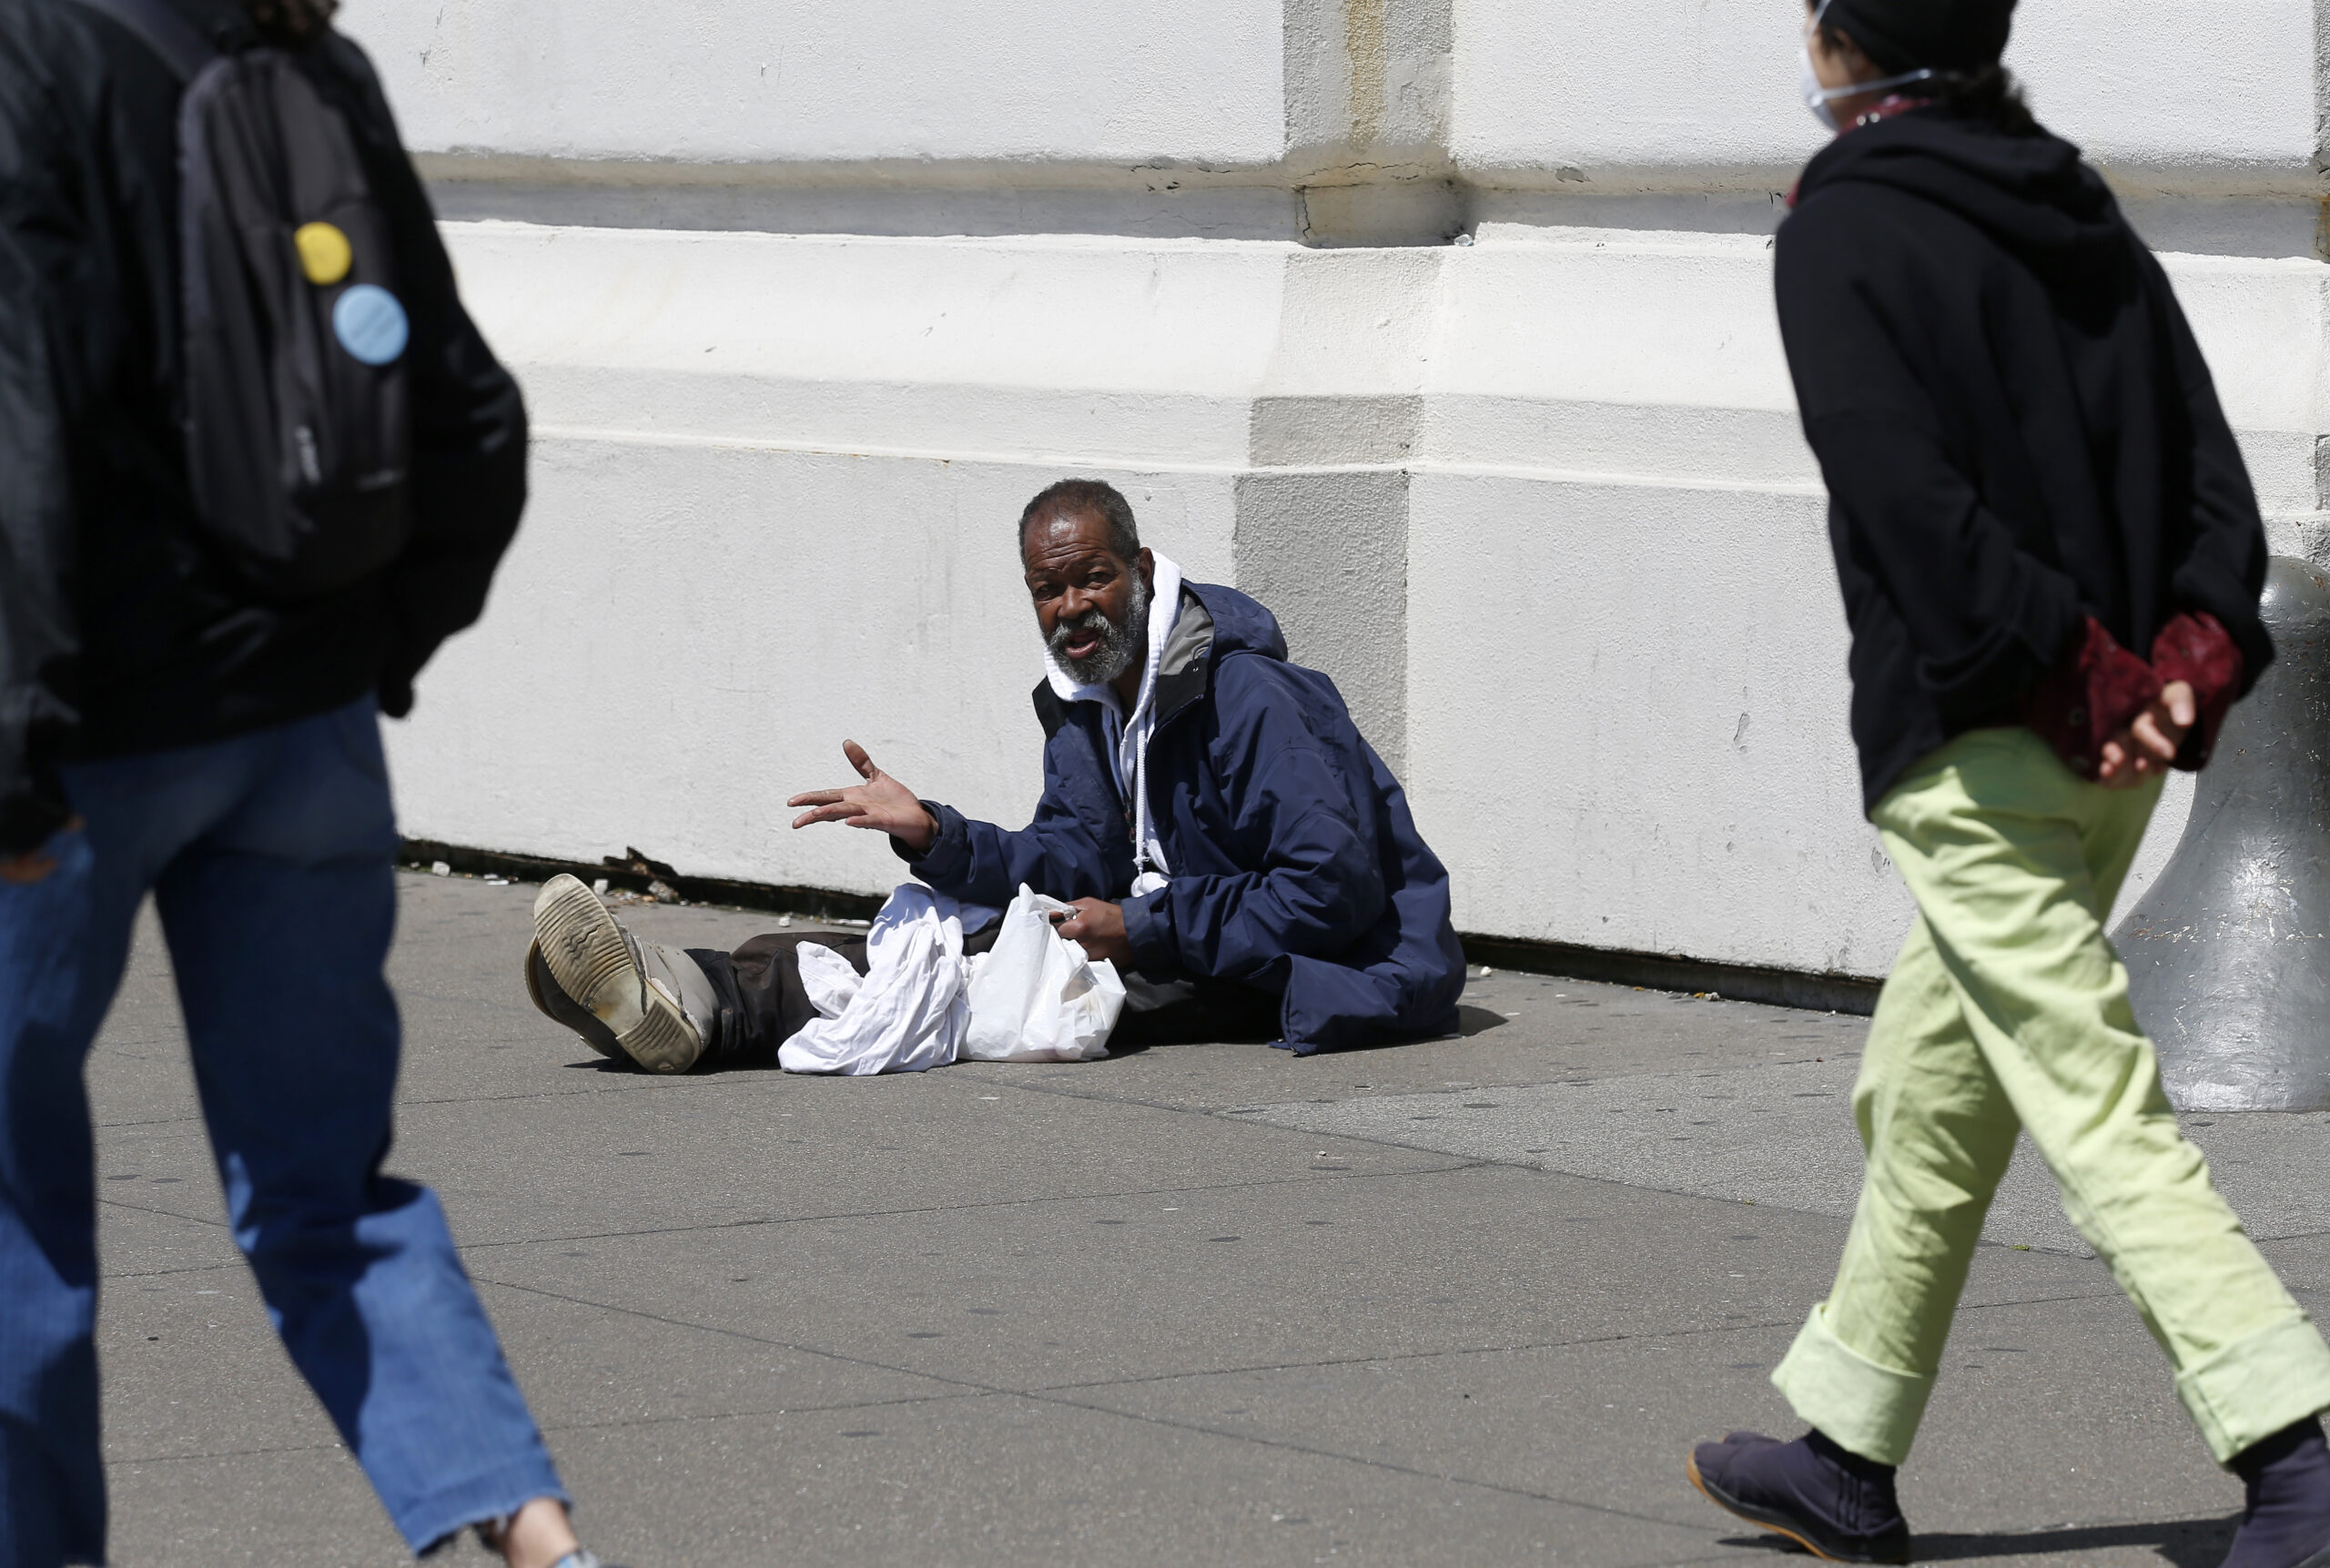 An unhoused person sits on sidewalk as others walk by,